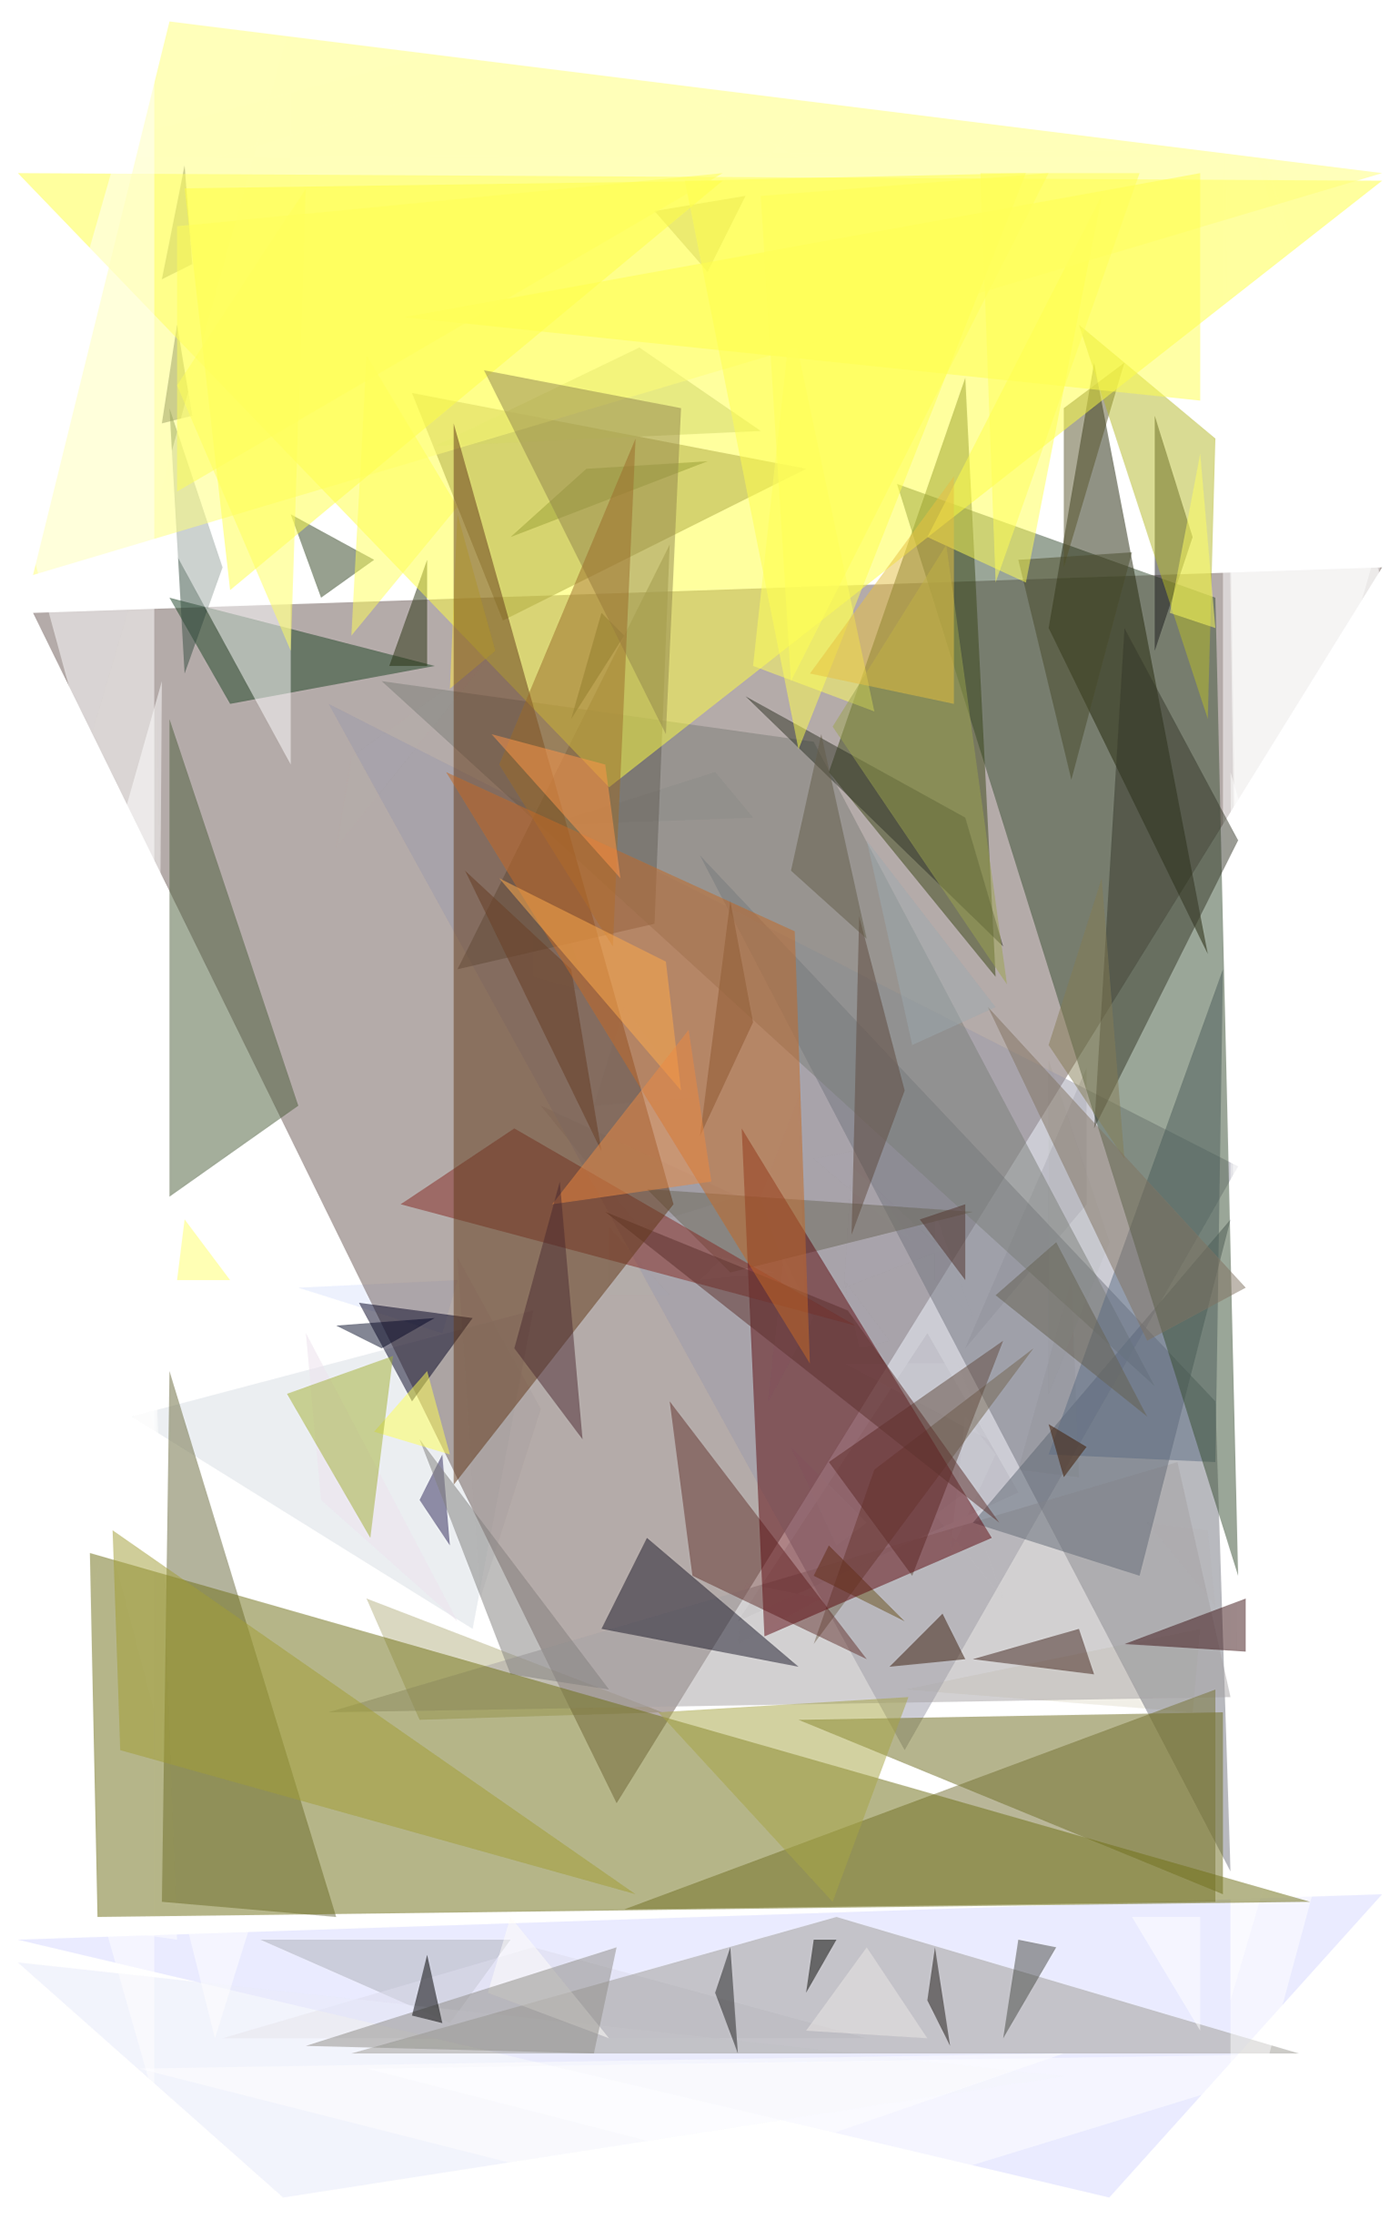 a very rough, primitive rendering of the empress card using triangles. This was the form used below.